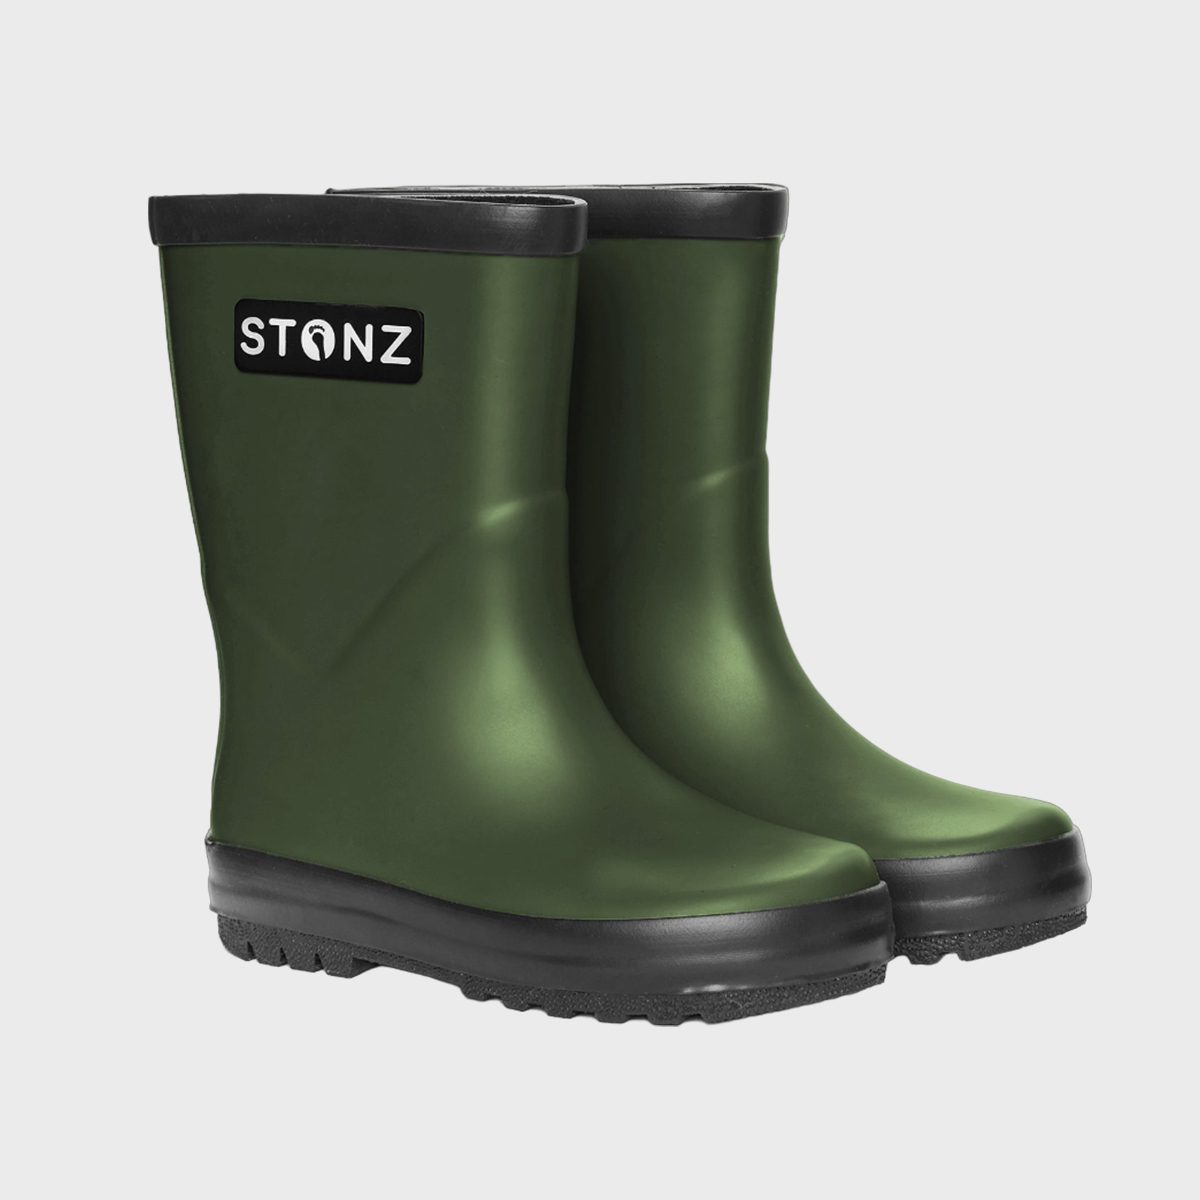 <p>Jumping and splashing in puddles is a right of passage for kids. These <a href="https://stonz.com/products/rain-boots" rel="noopener noreferrer">rain boots</a> are made from toxic-free rubber and are specially designed for children's developing feet. They feature a wide opening, non-slip, super flexible soles and a soft cotton lining.</p> <p>They're even certified by both the American Podiatric Medical Association and the Canadian Podiatric Medical Association. Rain boots aren't just great gifts for girls. Once you see how much fun they're having splashing around, you'll want to join in. Here are the <a href="https://www.rd.com/list/rain-boots-for-women/" rel="noopener noreferrer">best rain boots</a> to have in your closet.</p> <p class="listicle-page__cta-button-shop"><a class="shop-btn" href="https://stonz.com/products/rain-boots">Shop Now</a></p>